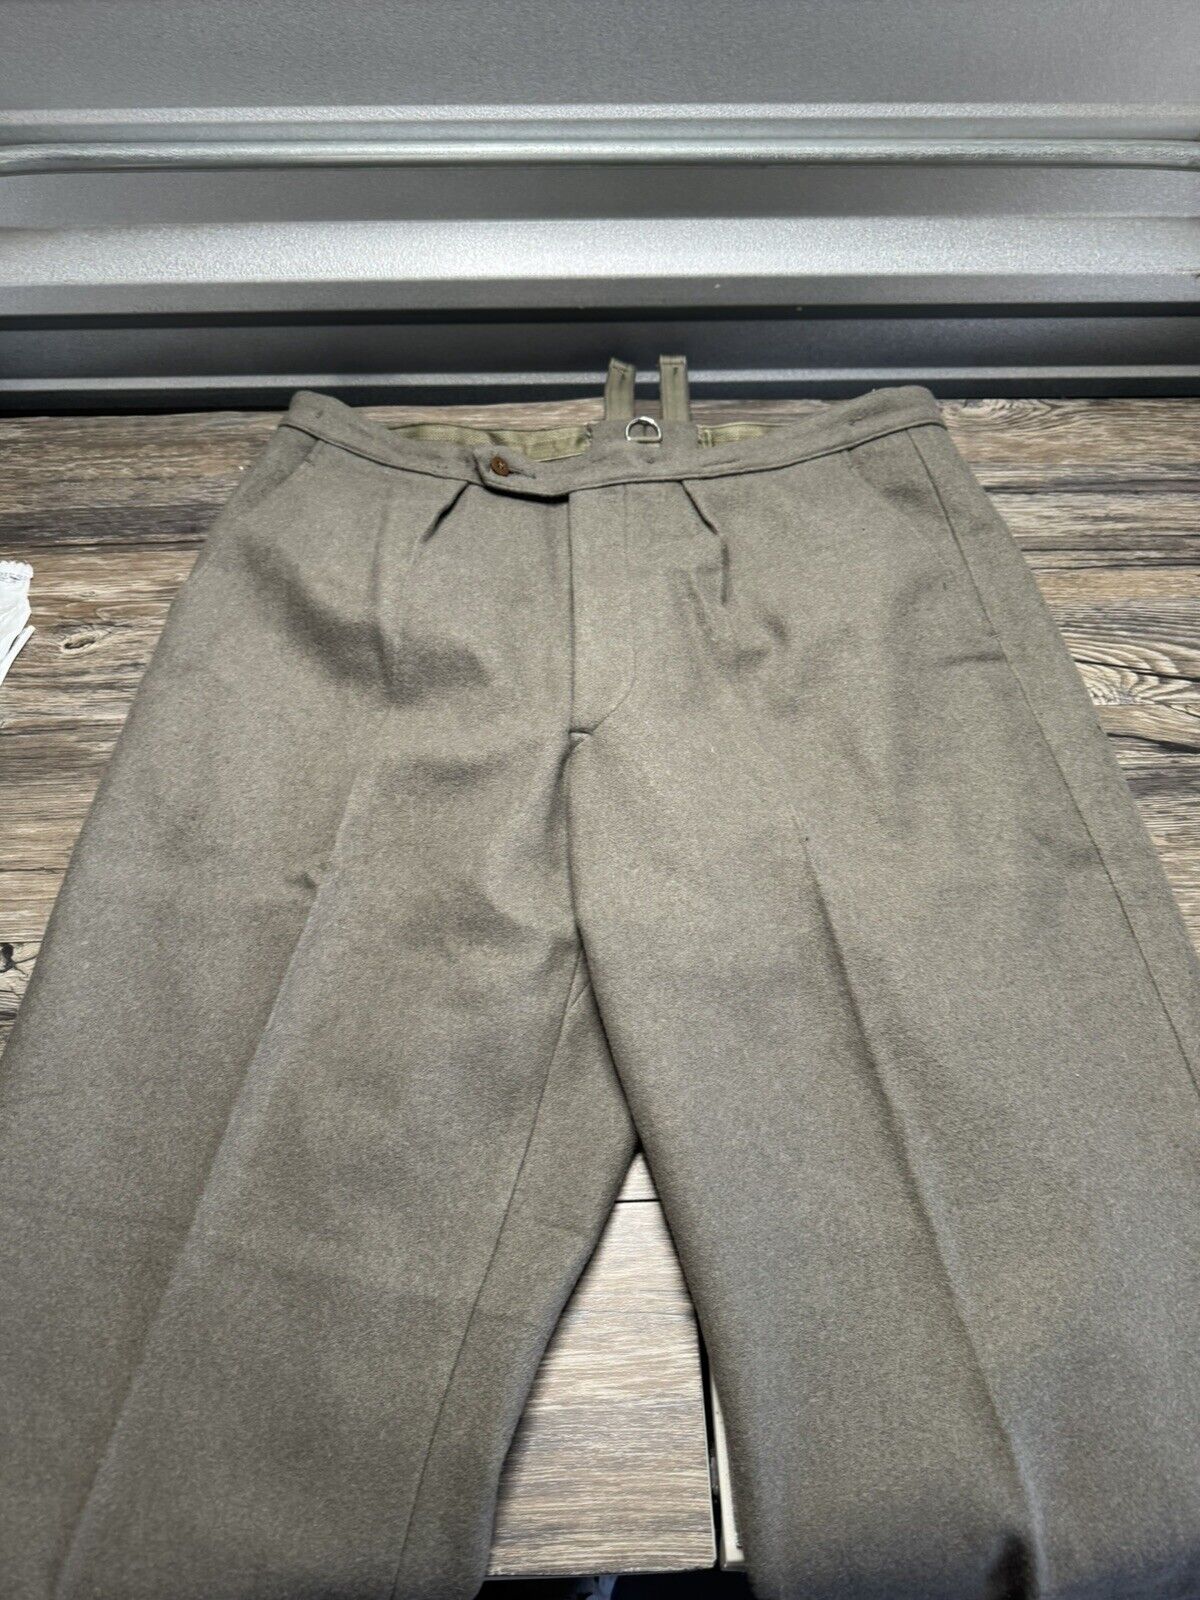 XLarge SG56 Authentic East German Grey Officer Trousers Pants Breeches NVA 38x30